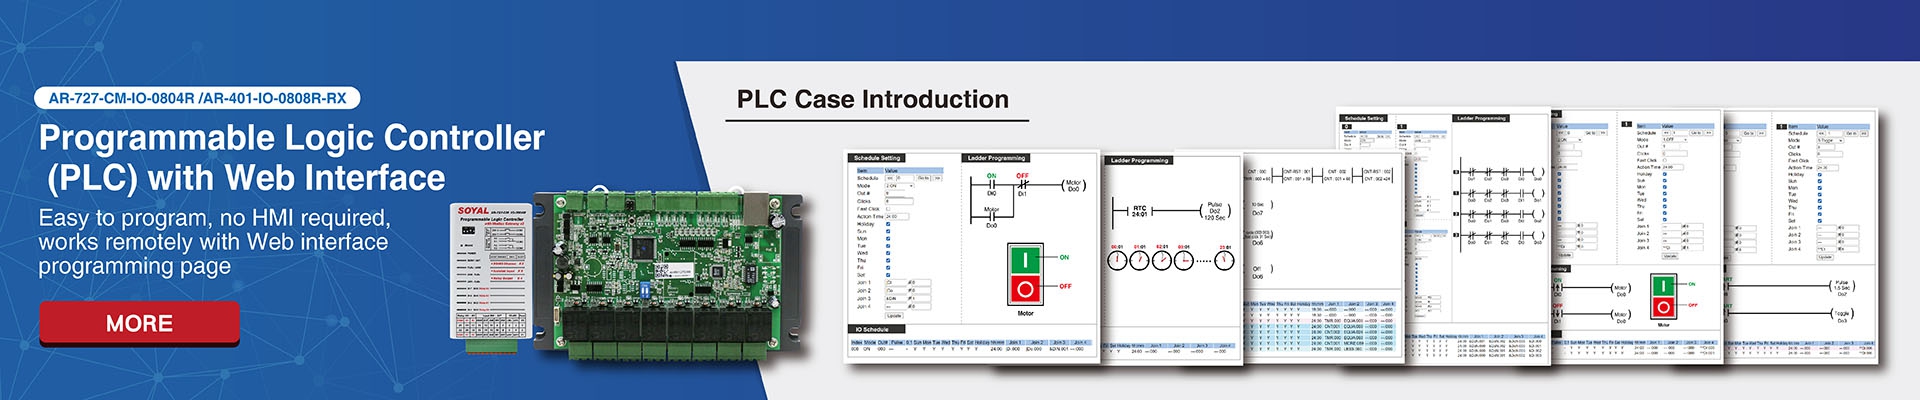 Programmable Logic Controller  (PLC) with Web Interface(圖)